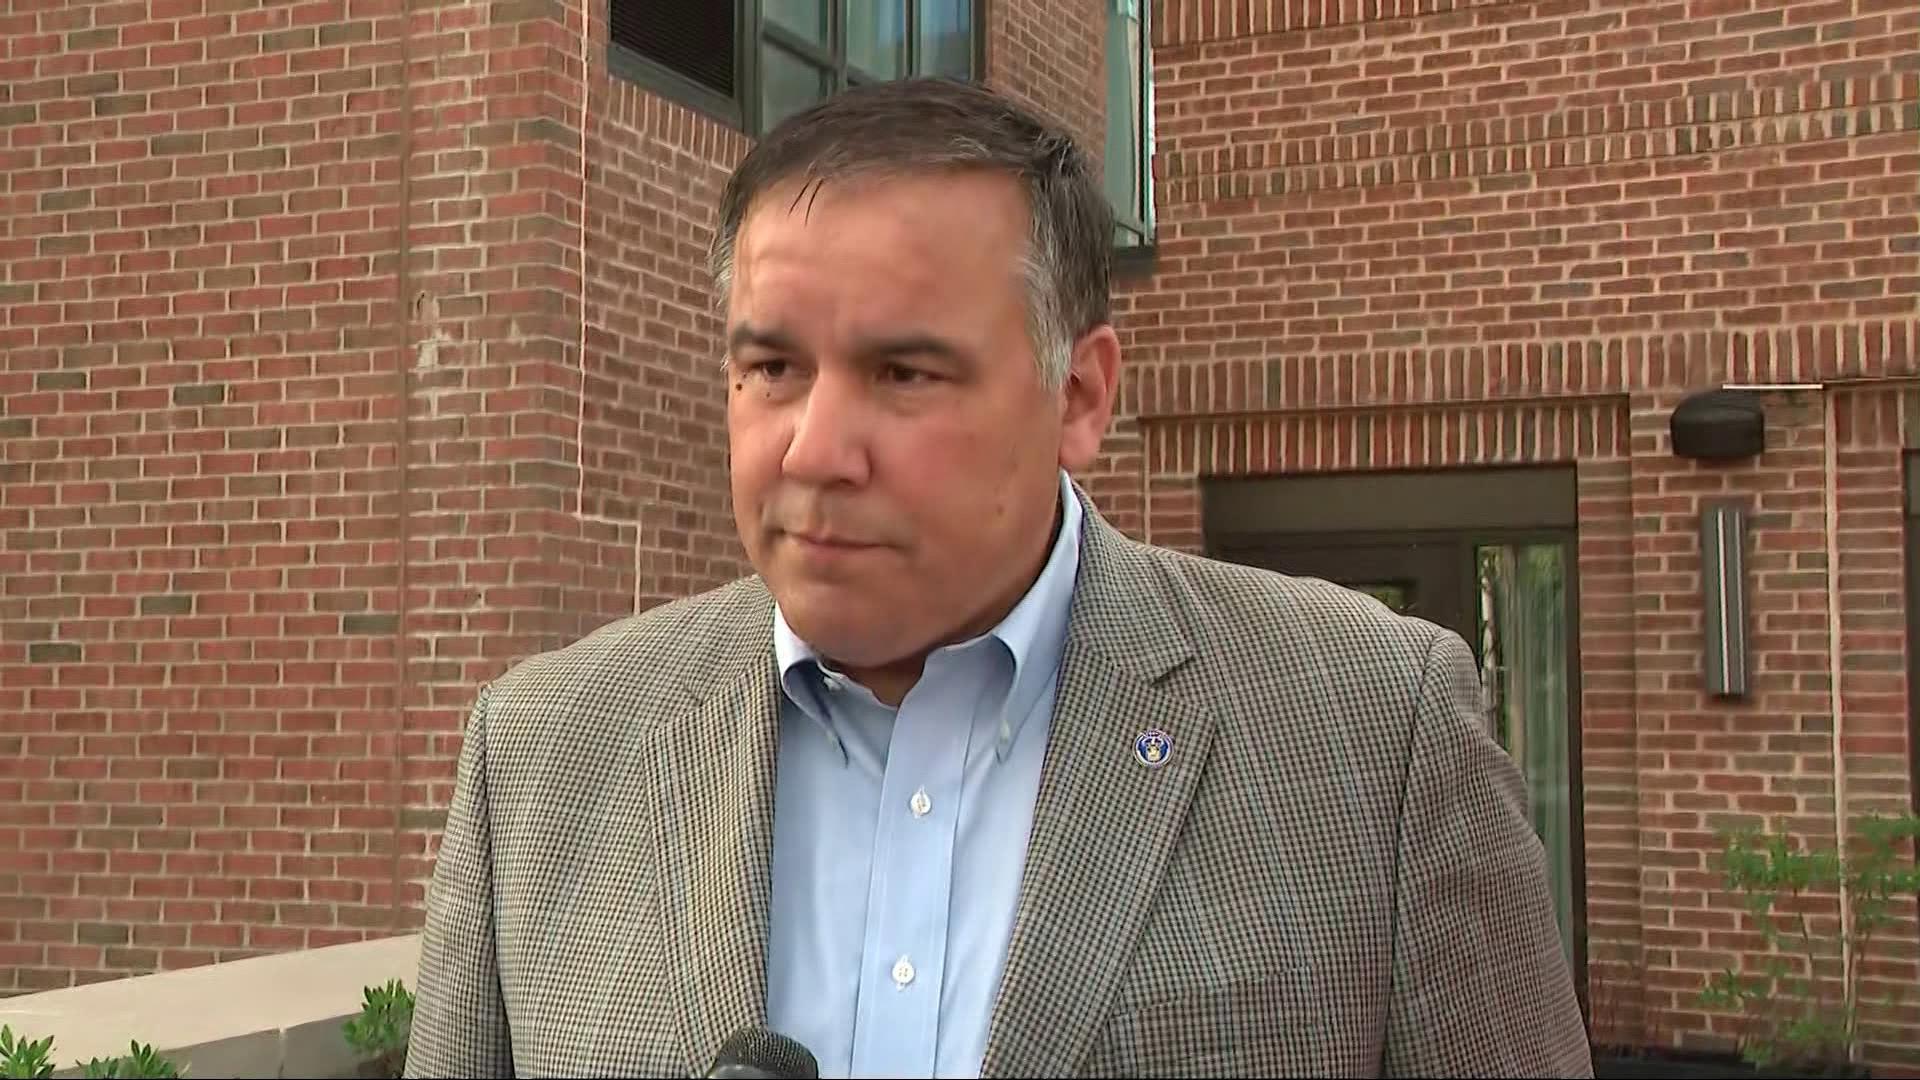 Mayor Andrew Ginther talked about the safety measures being put into place following Sunday's mass shooting in the Short North.